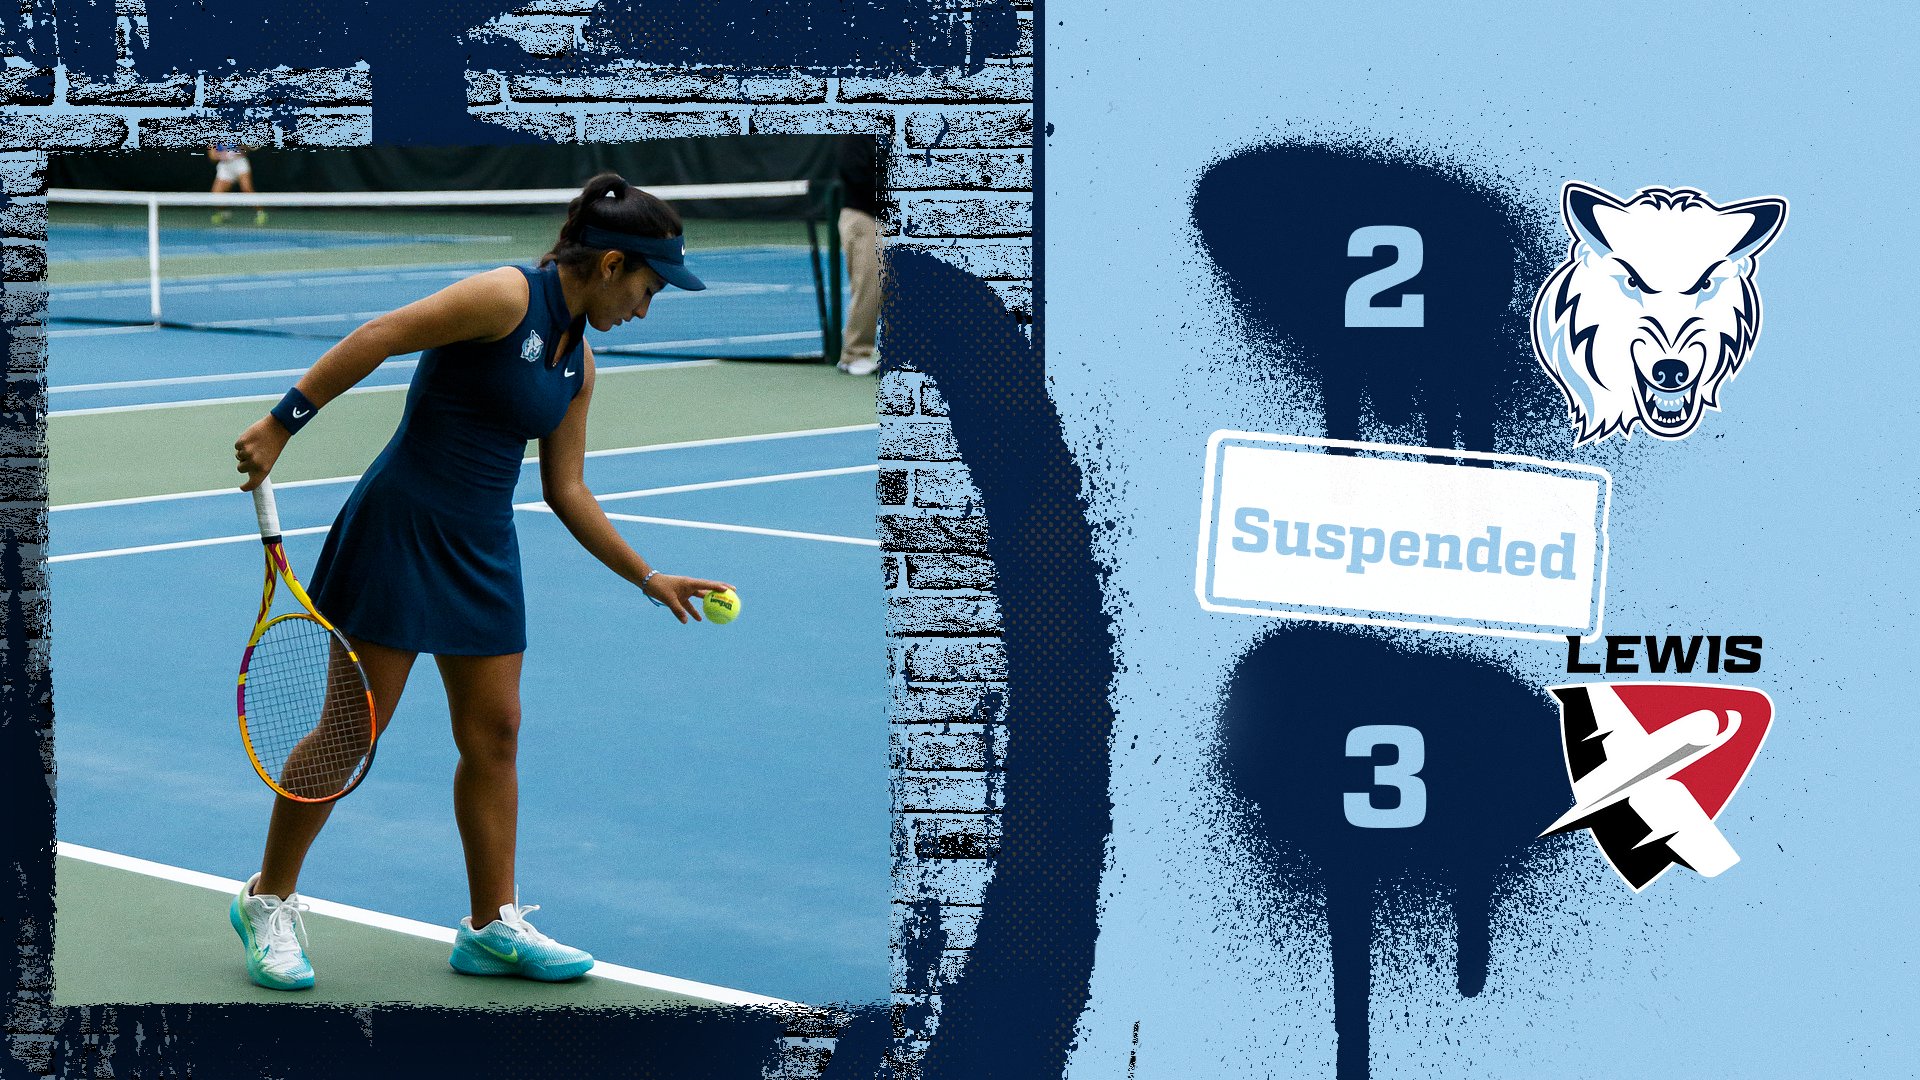 Women’s Tennis Match Against Lewis is Suspended